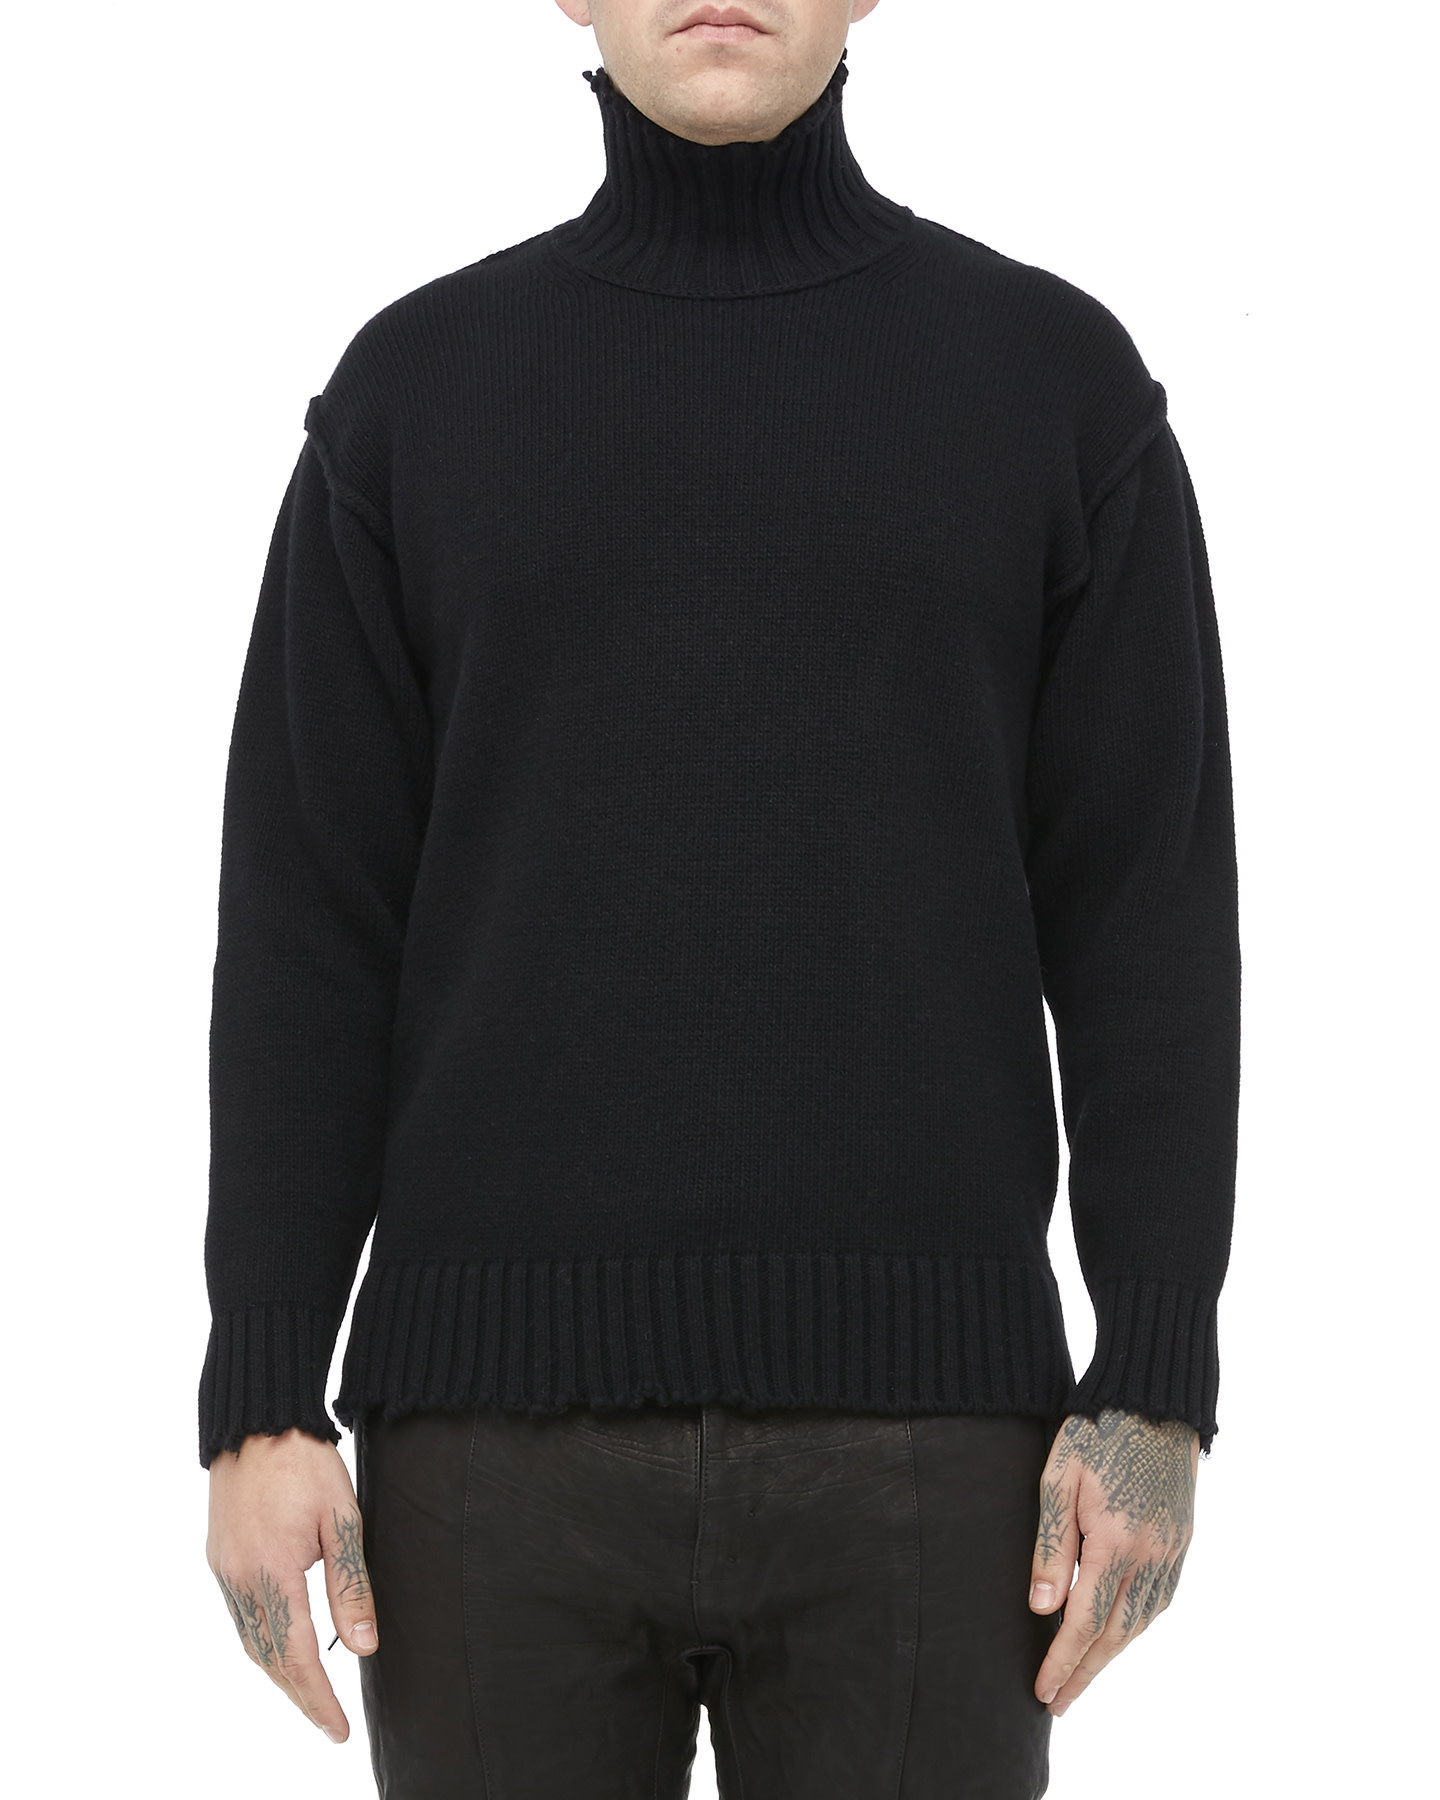 ECO CASHMERE KNIT DISTRESSED TURTLE NECK